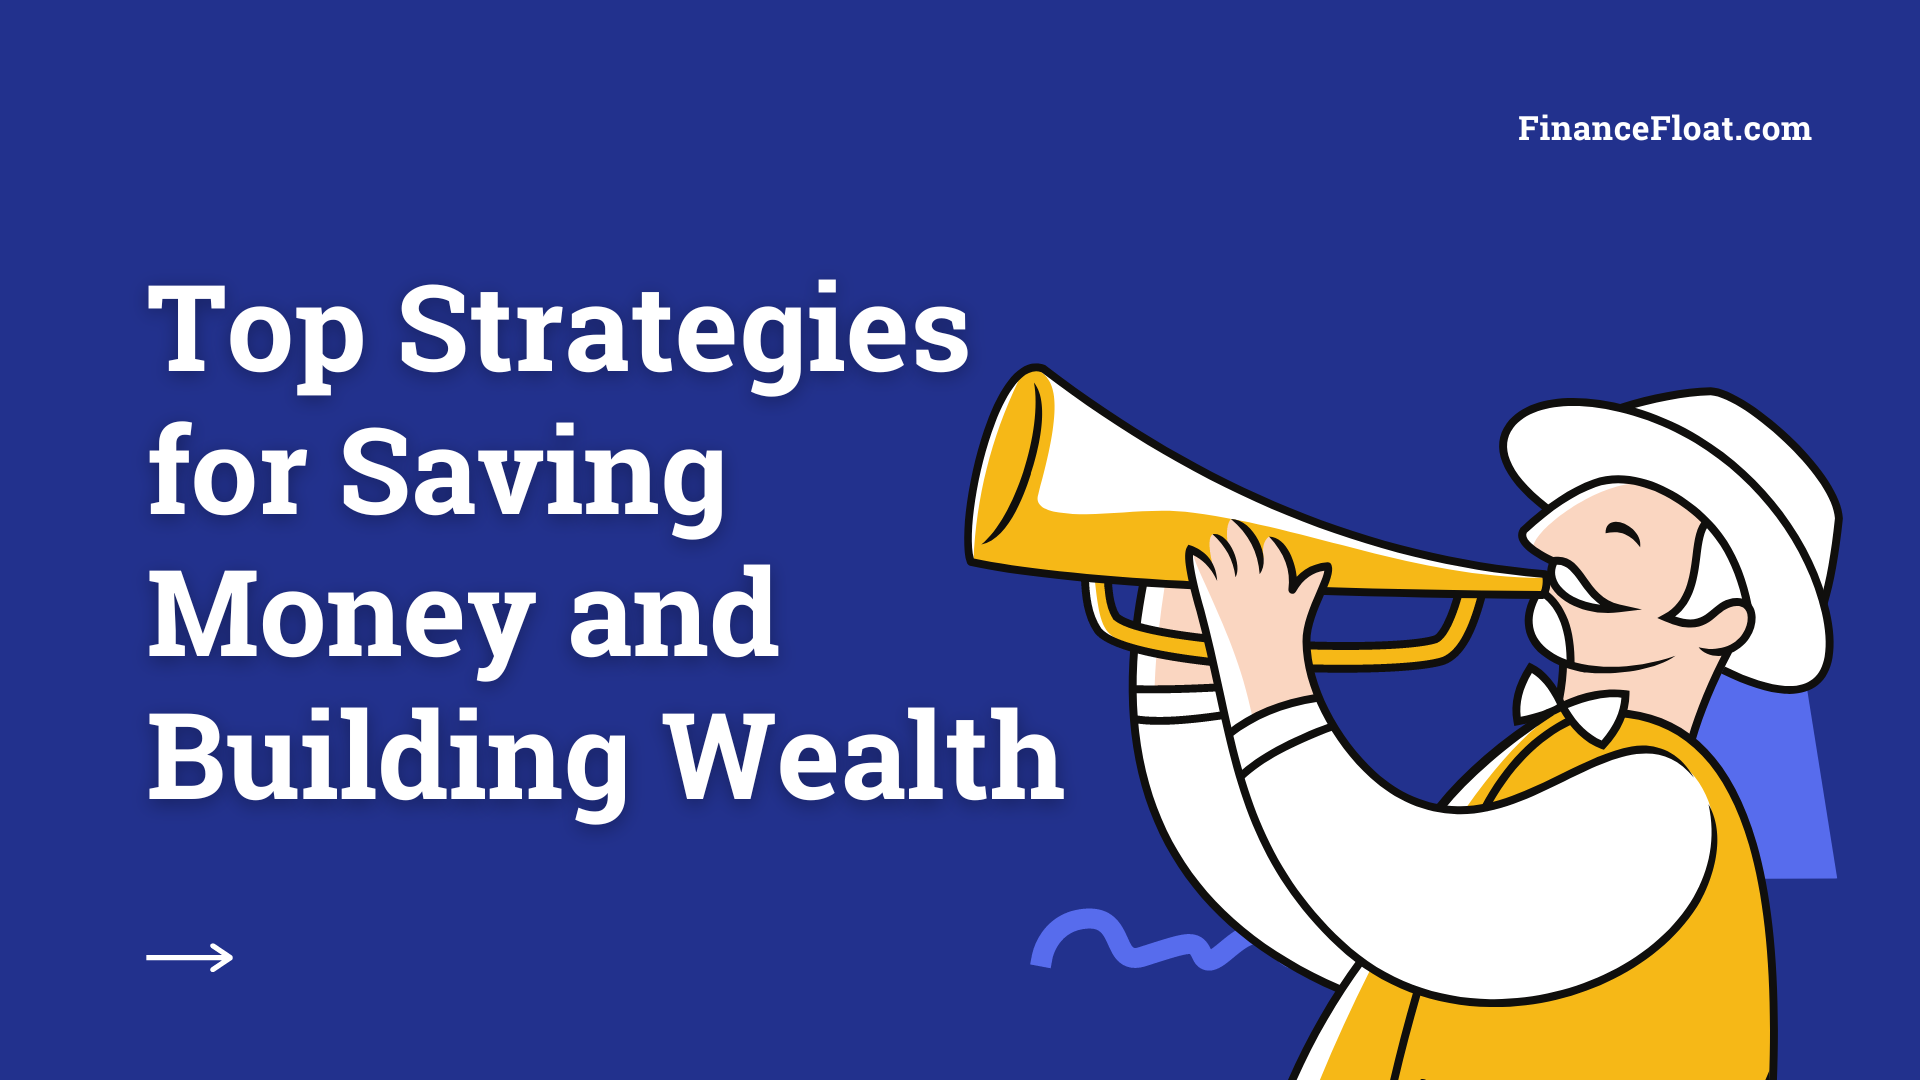 Top Strategies for Saving Money and Building Wealth